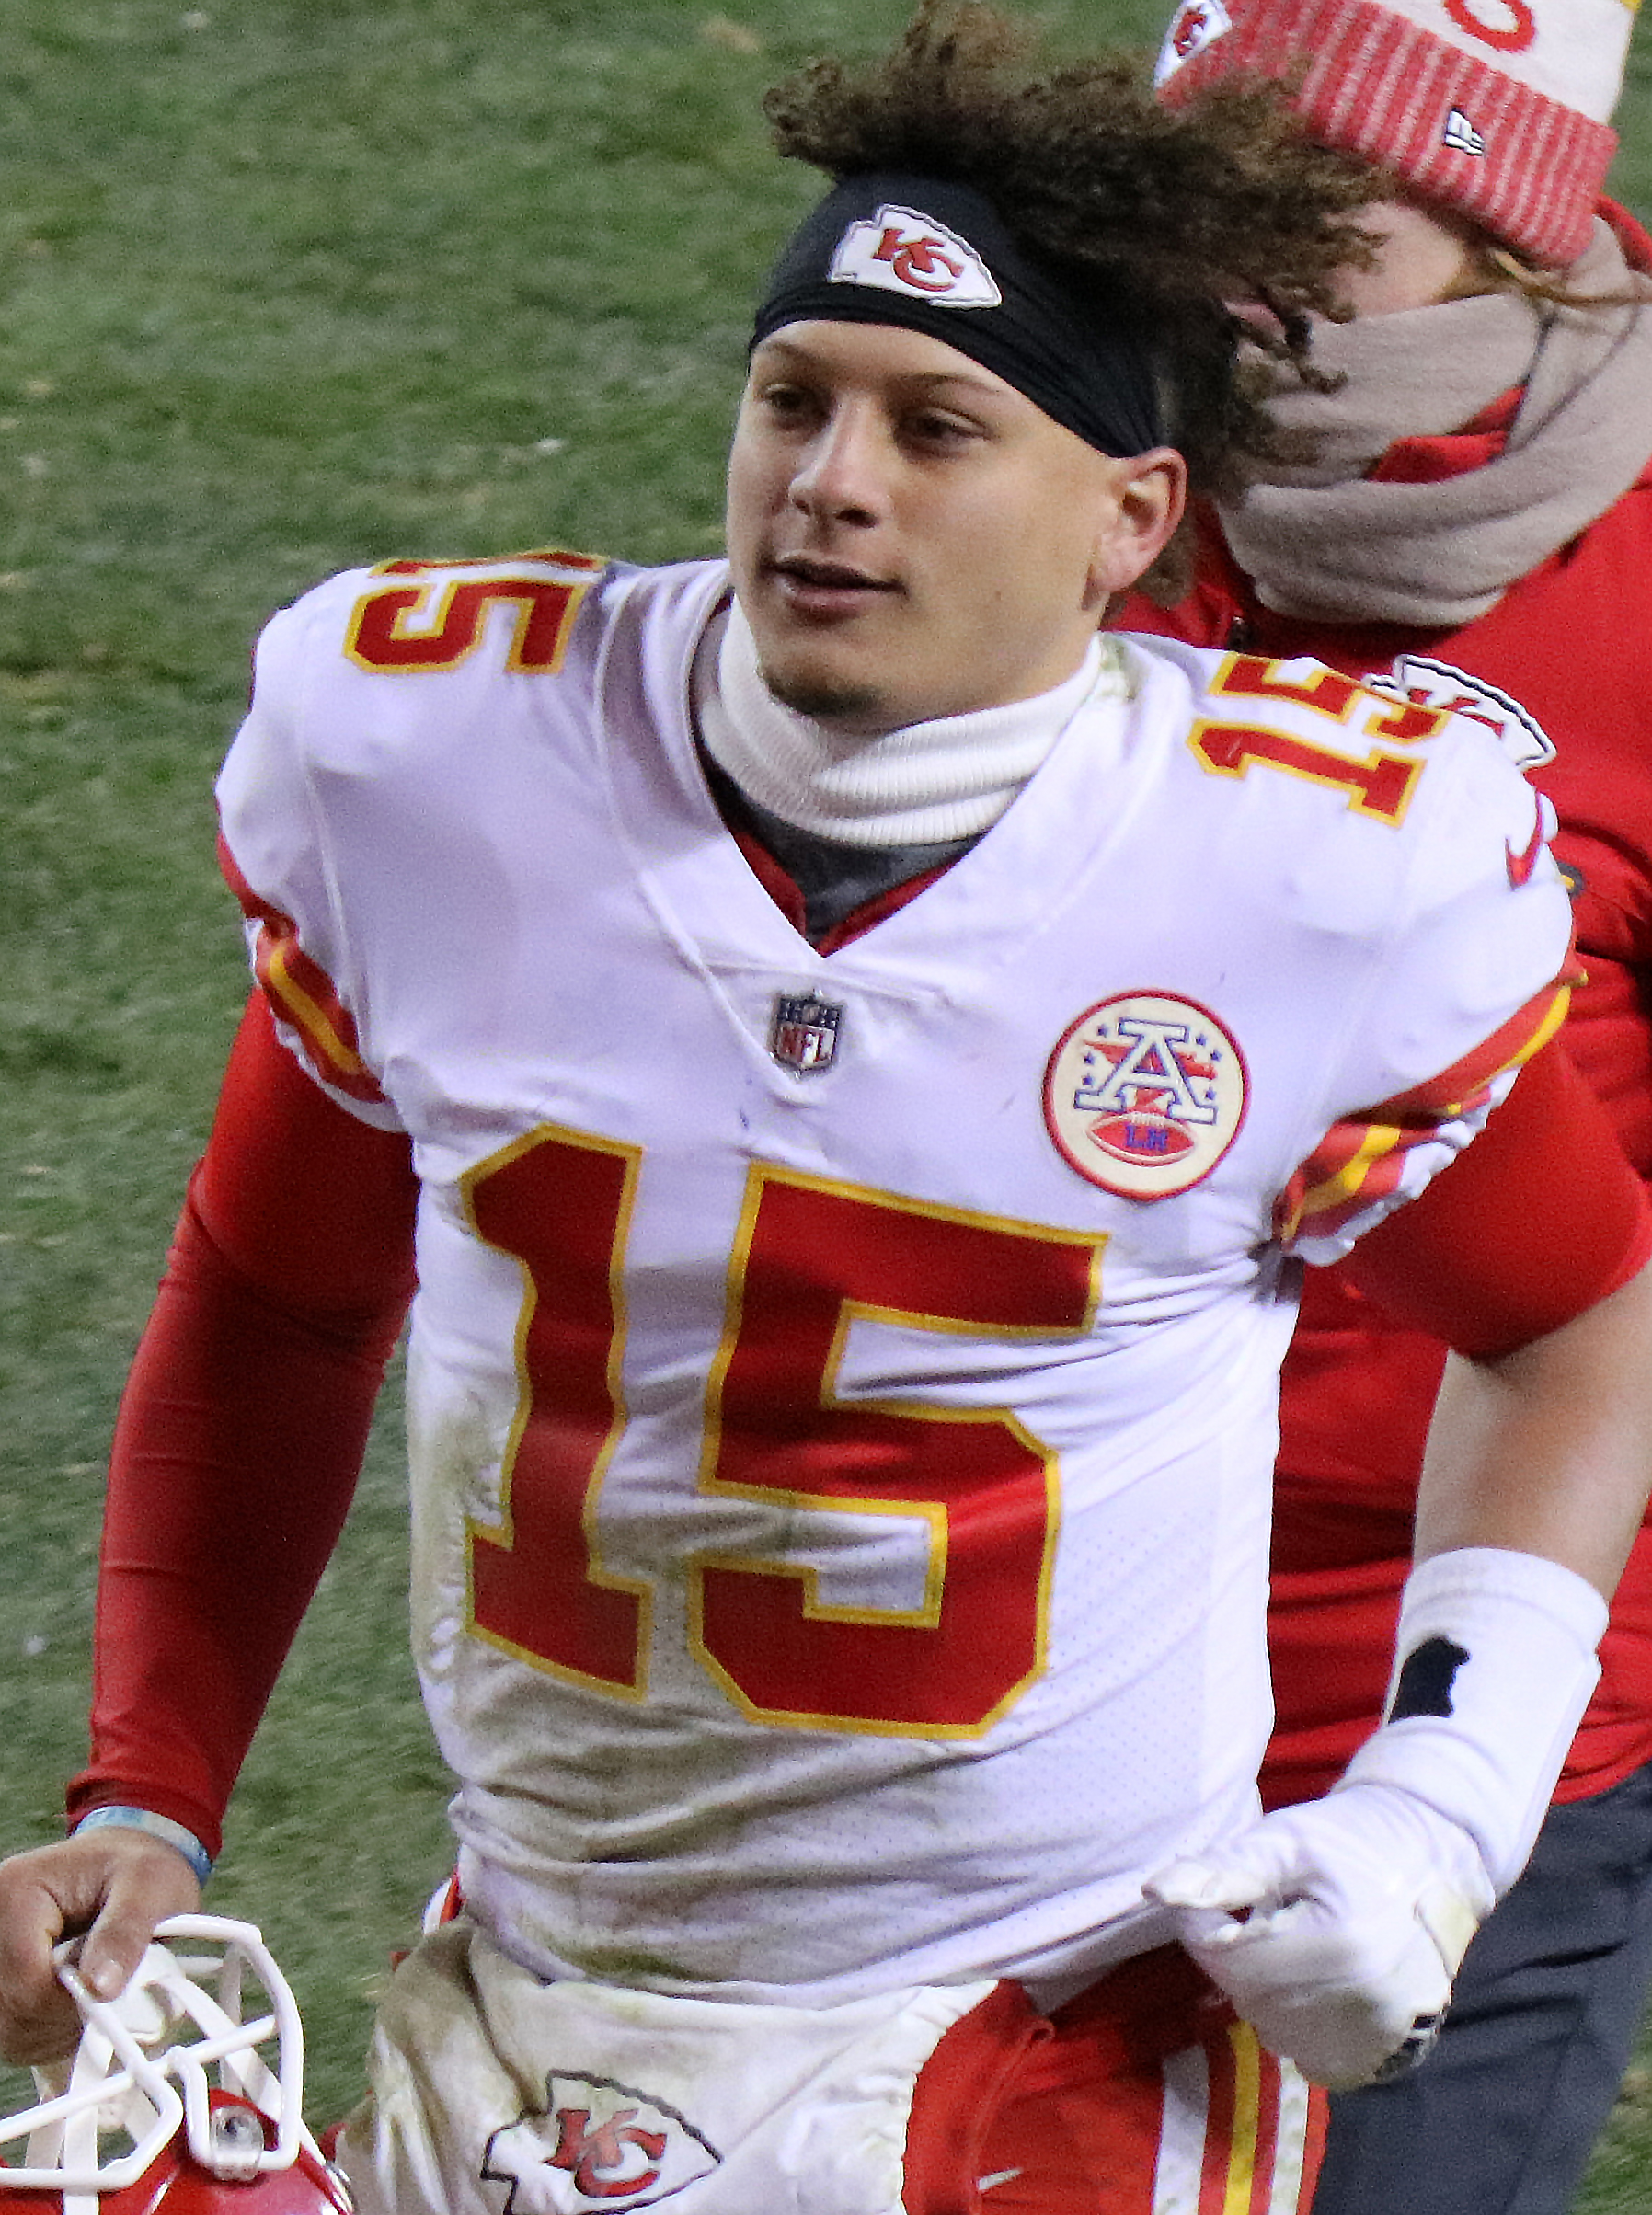 NFL-Mahomes leads Chiefs past Titans and into Super Bowl